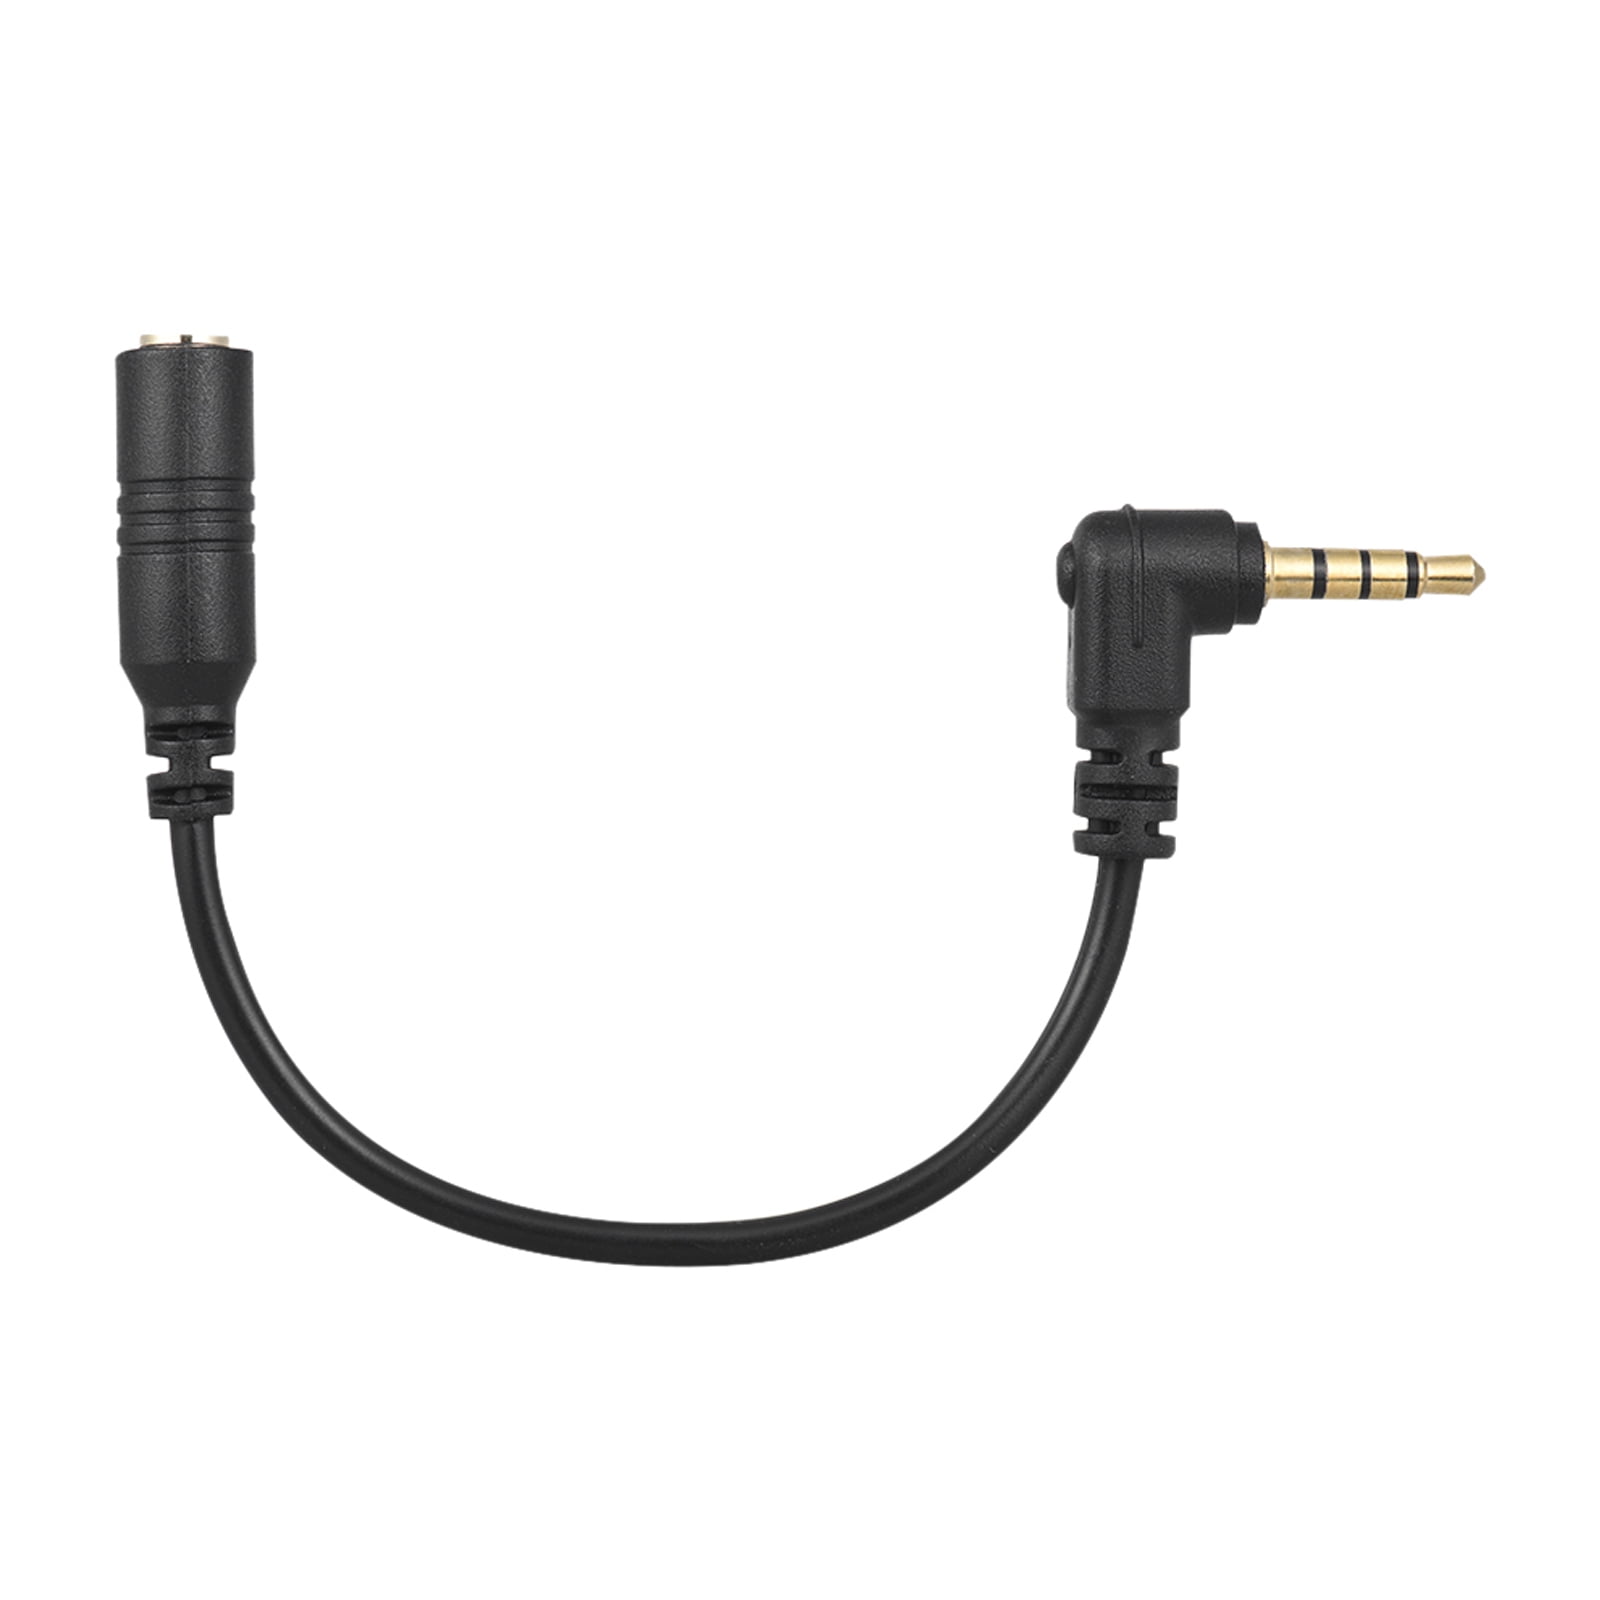 Andoer 2m/ 6.6ft XLR Cable Right Angle Male to Right Angle Female Plug for Microphone Mixer Mixing Console Loudspeaker